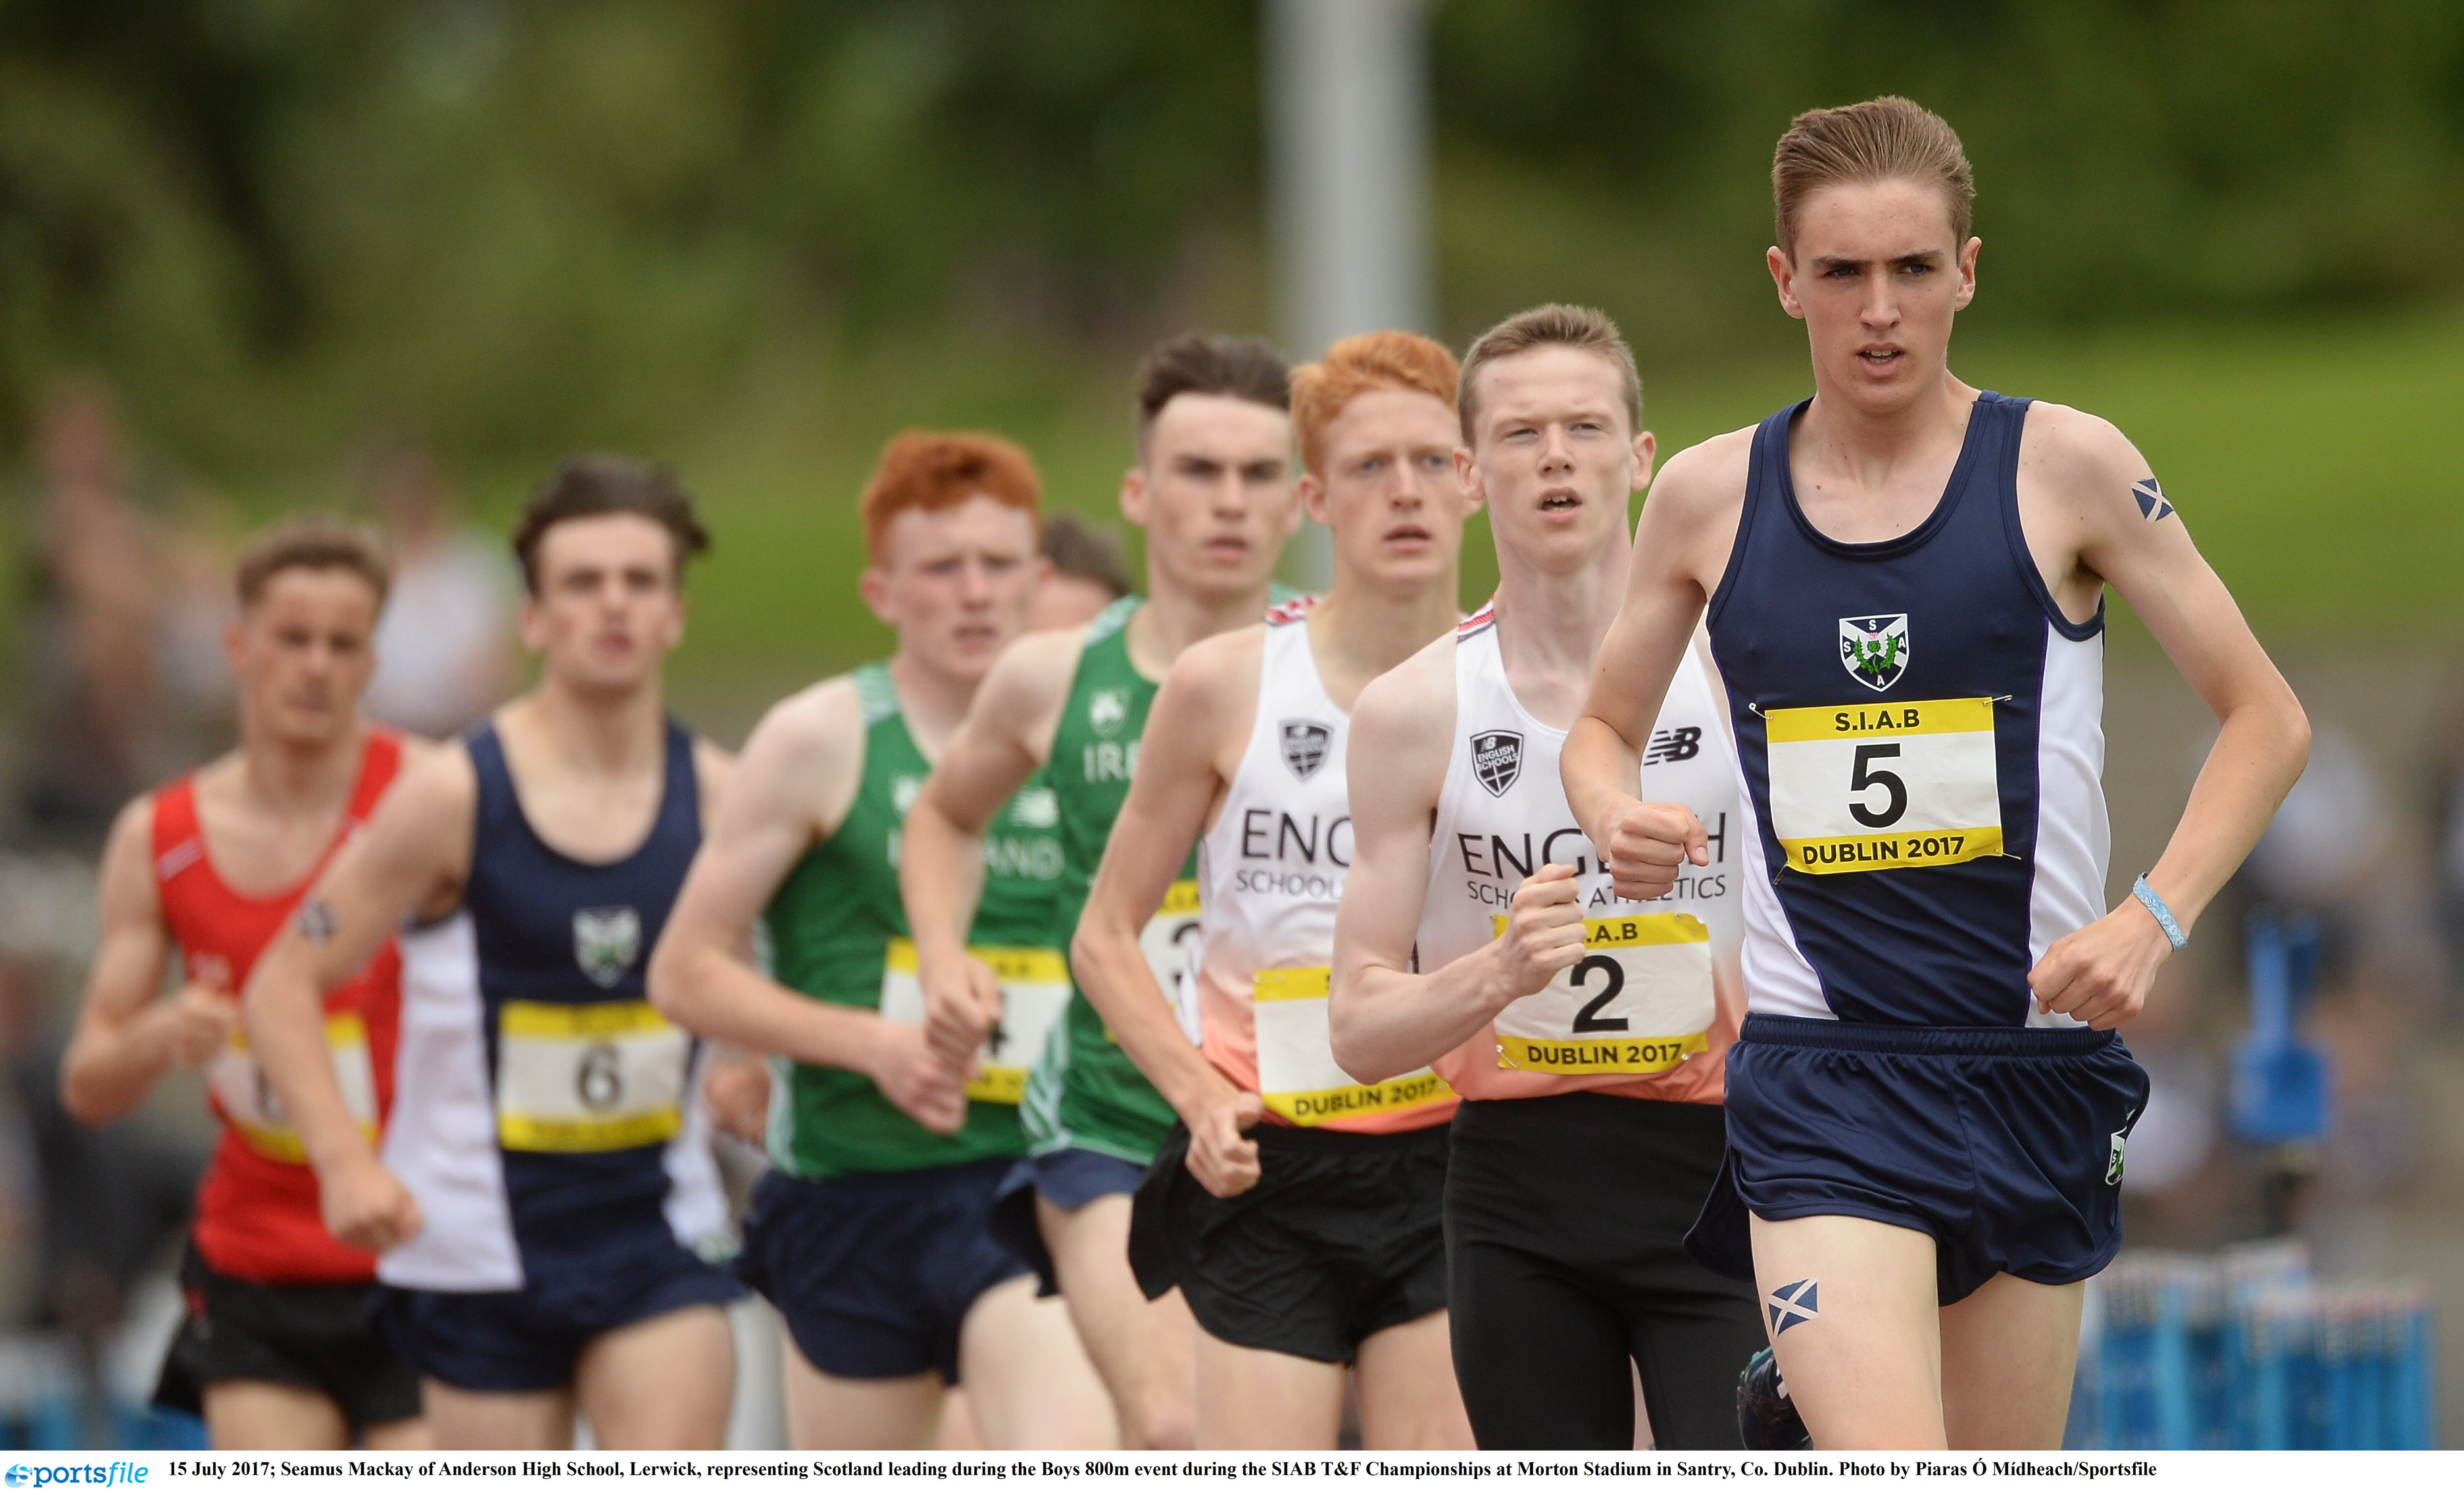 Irish Schools Select strong International Team set to compete in Derbyshire